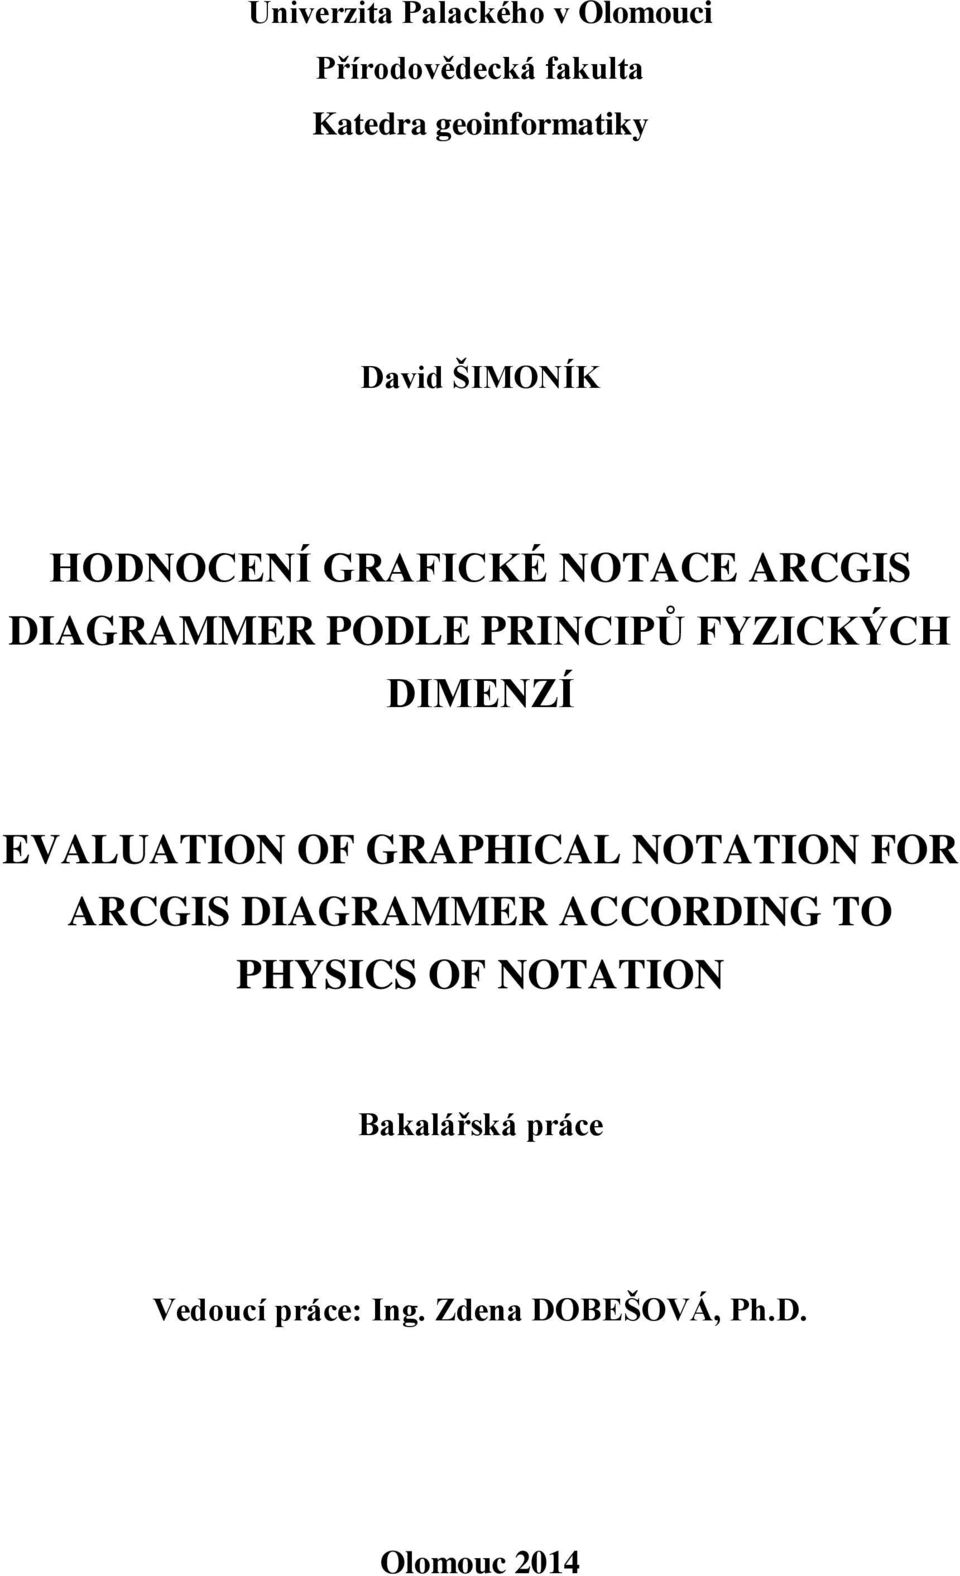 FYZICKÝCH DIMENZÍ EVALUATION OF GRAPHICAL NOTATION FOR ARCGIS DIAGRAMMER